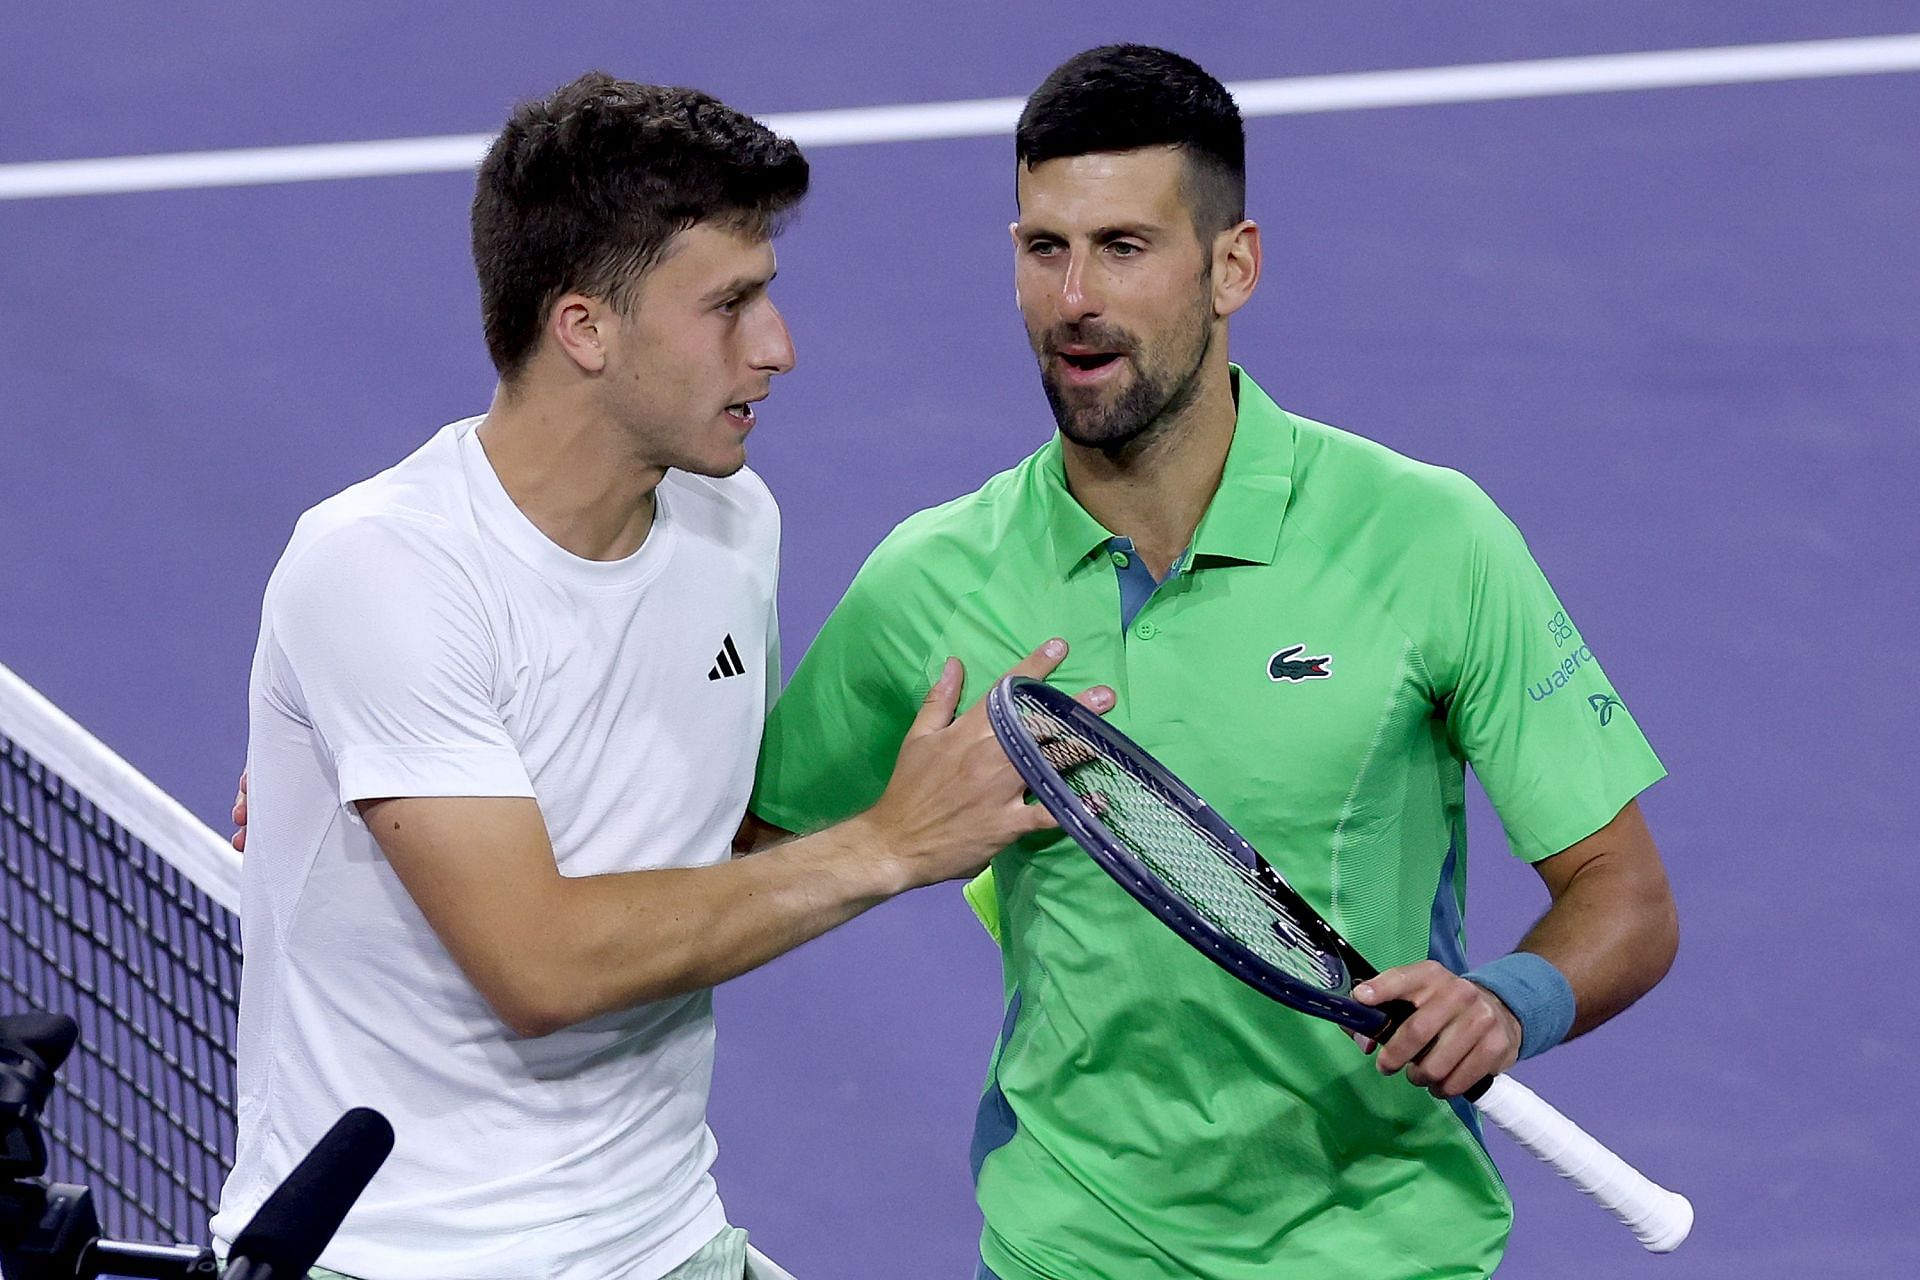 Novak Djokovic had a few choice words for Luca Nardi after their match in Indian Wells